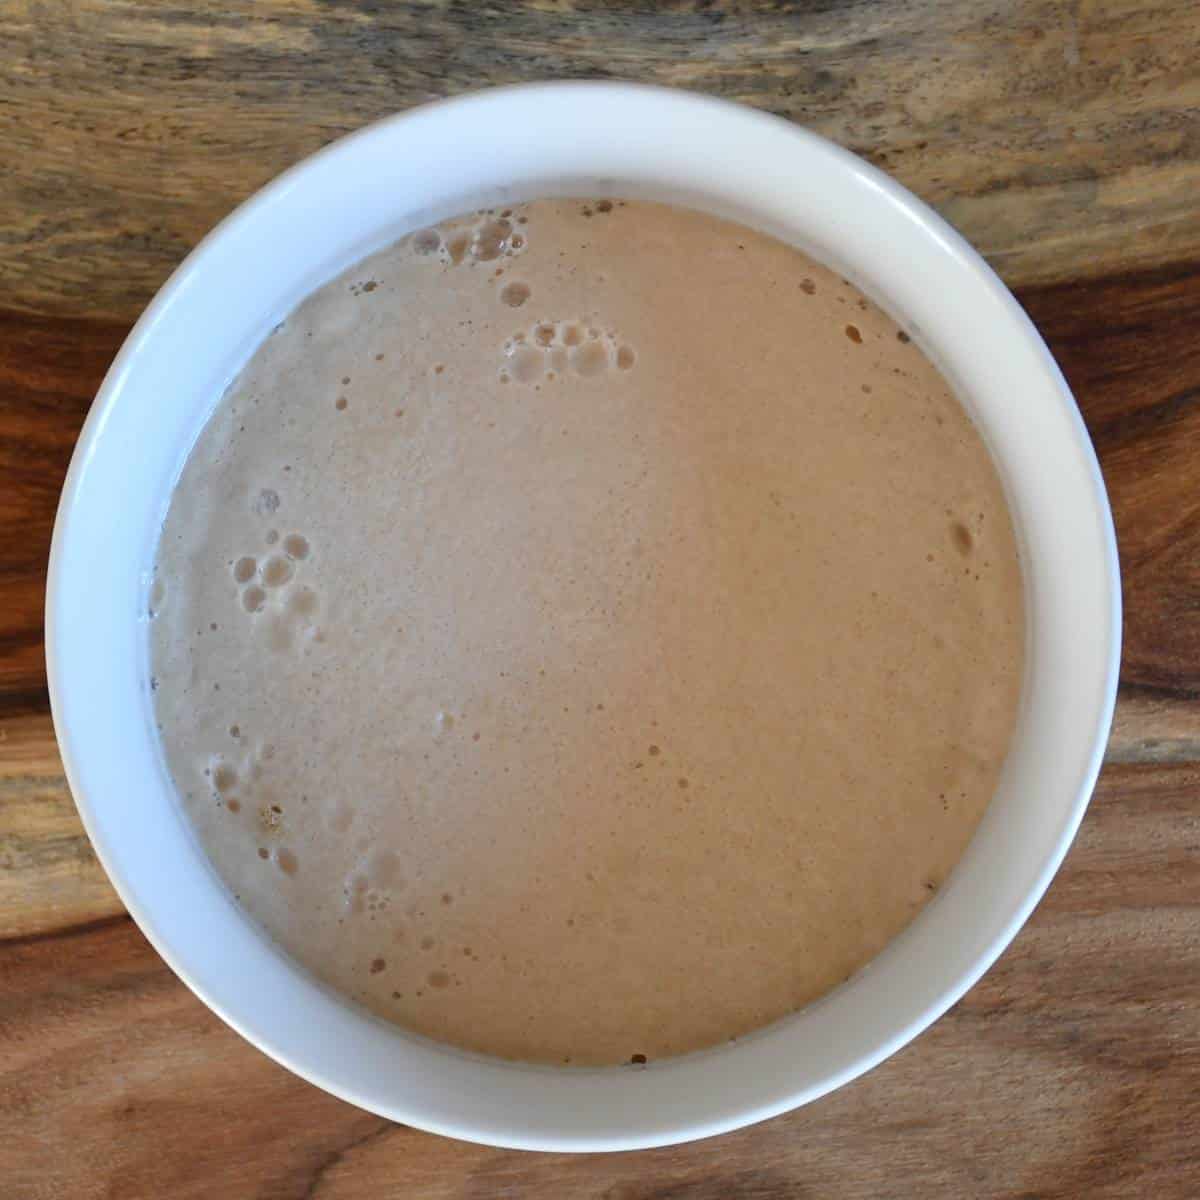 Yeast activation to make unsalted whole wheat pizza dough.